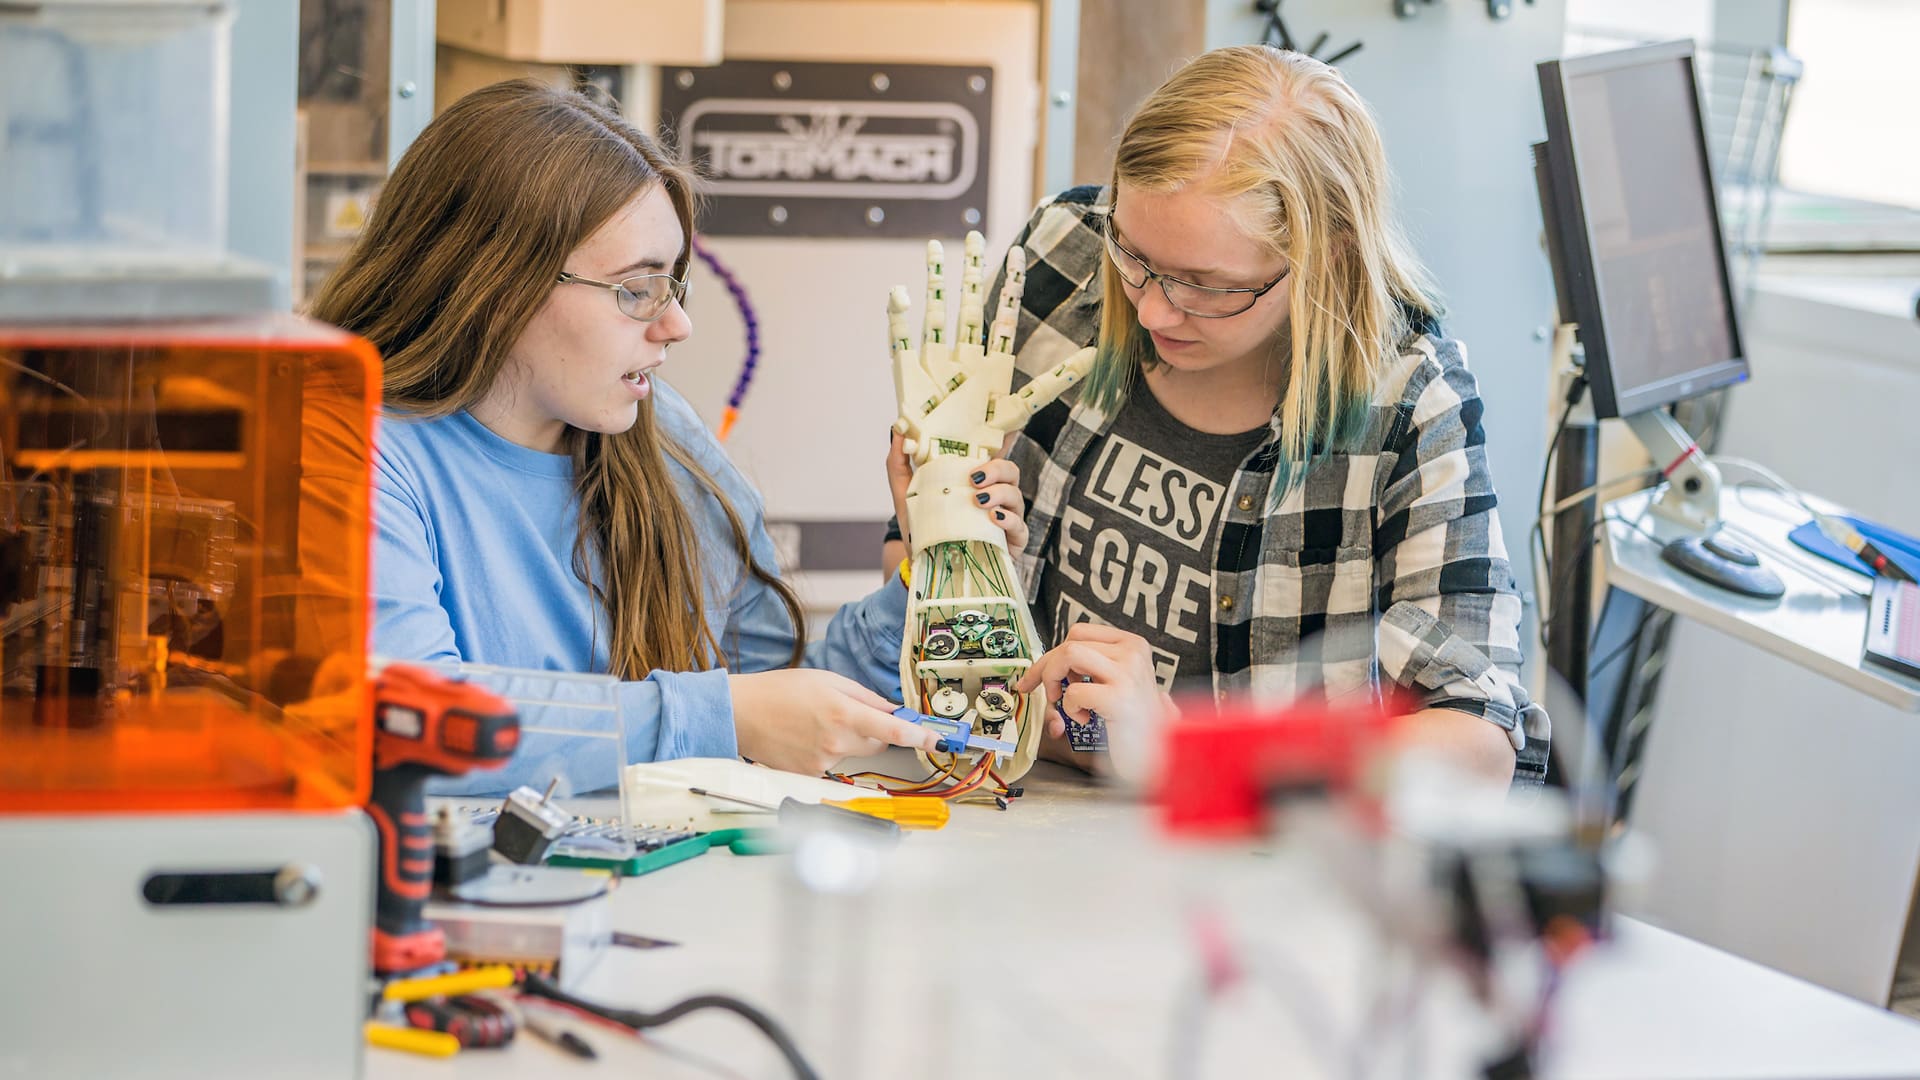 Two female students working on an engineering project.